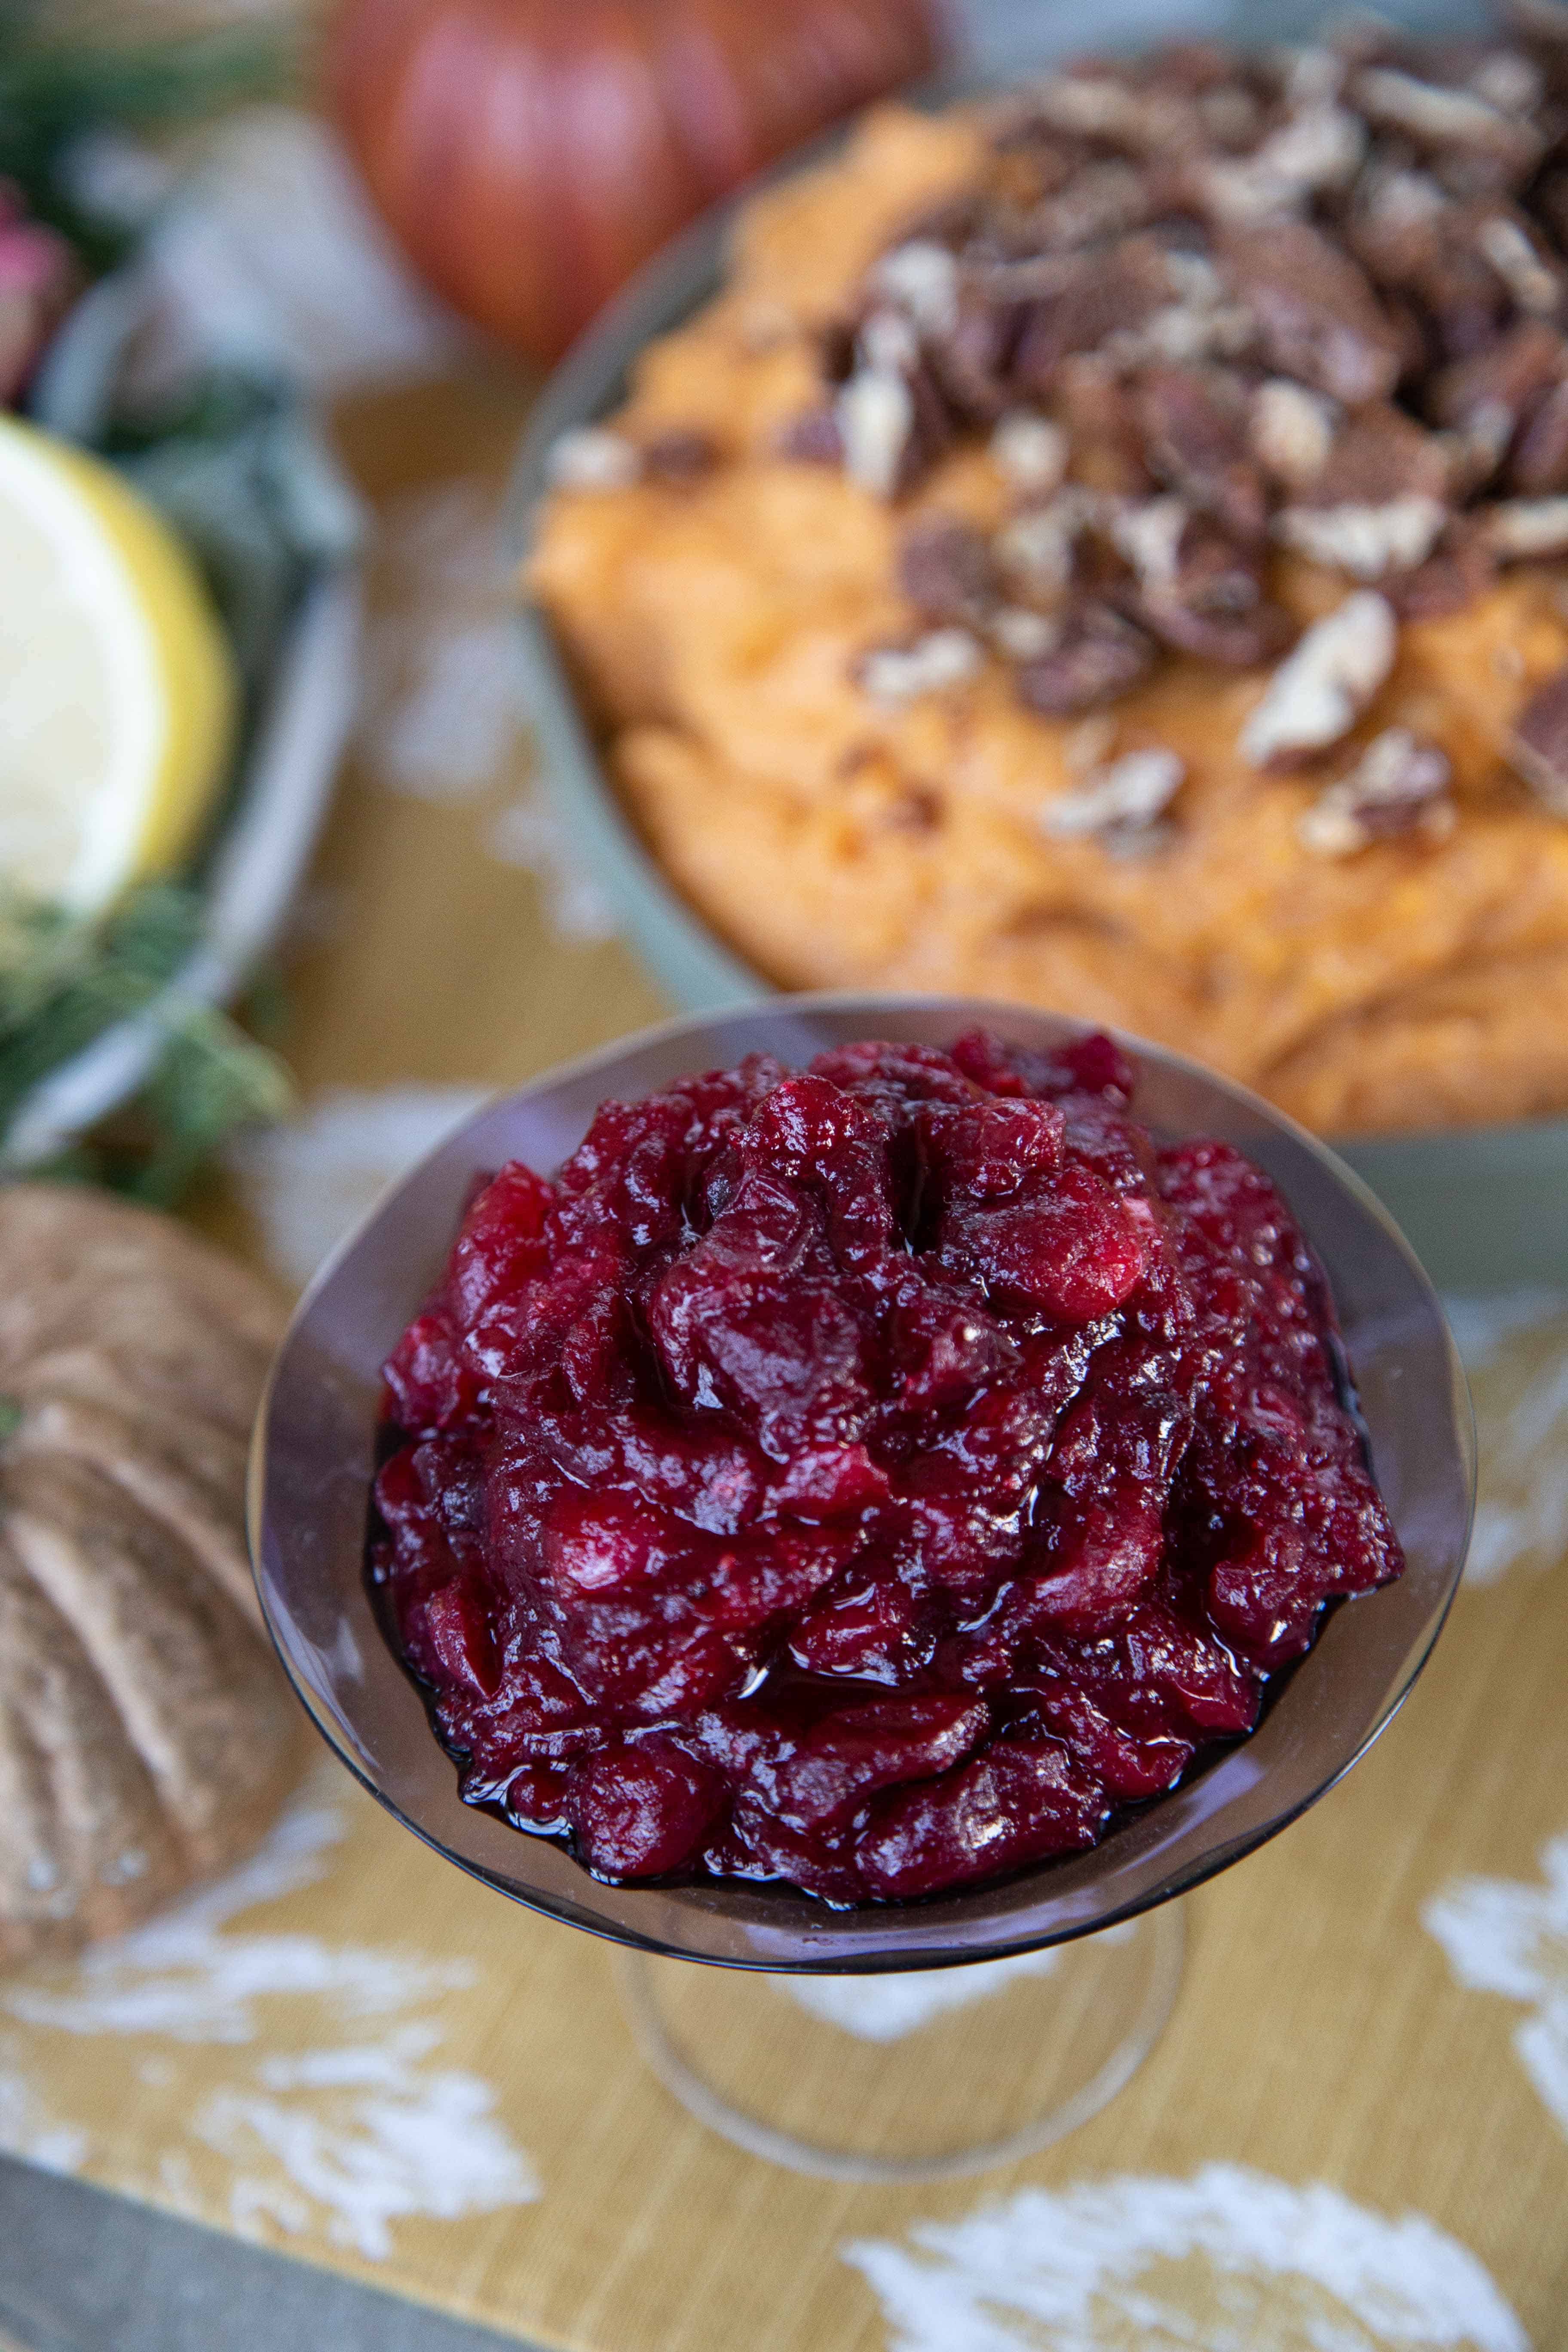 Apple Cranberry Sauce in a glass dish on a colorful Thanksgiving table.